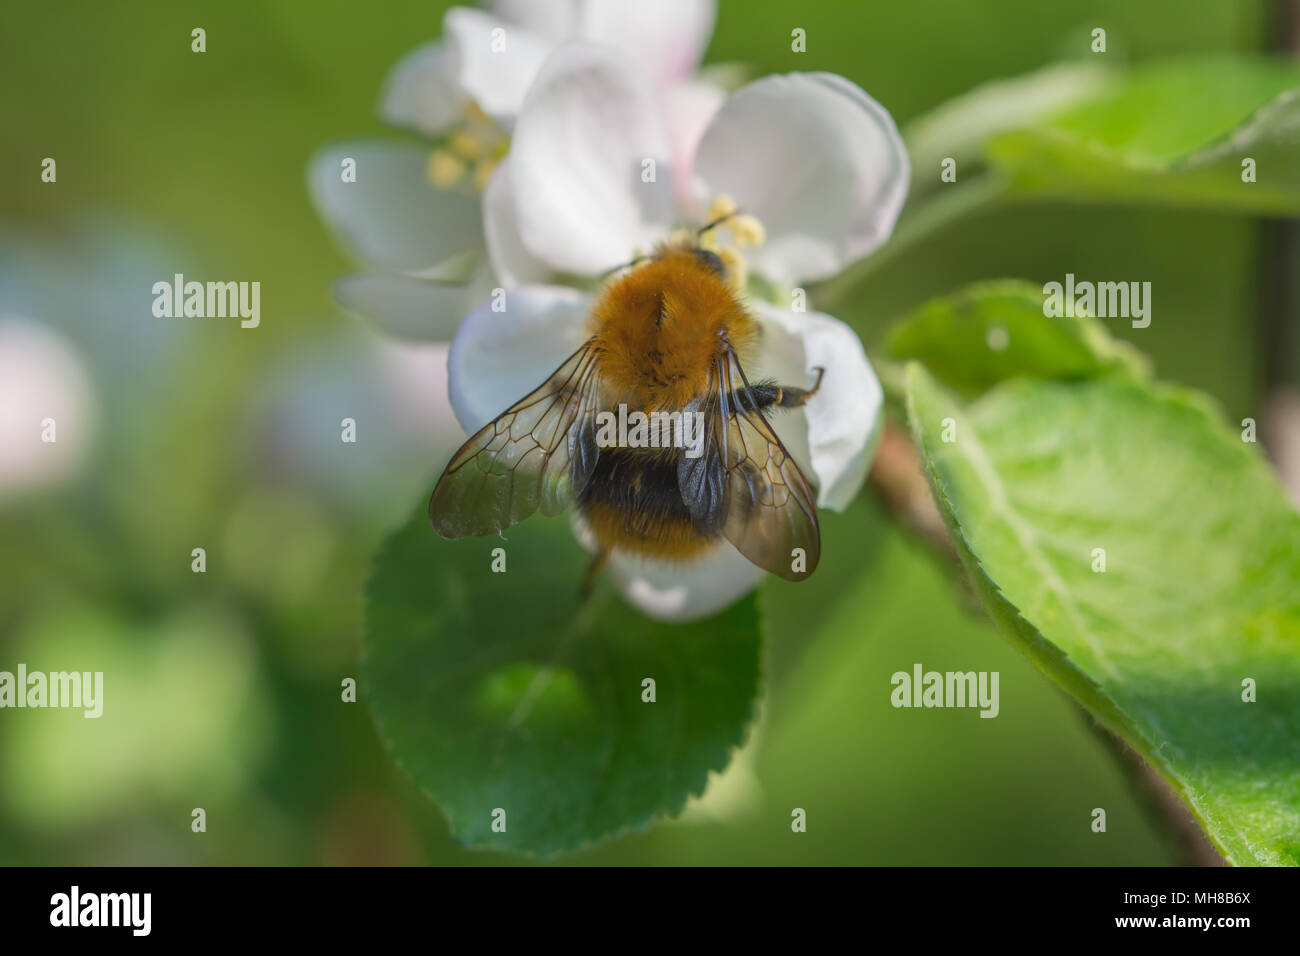 An apple tree blossom with a bumblebee feasting on it - macro Stock Photo